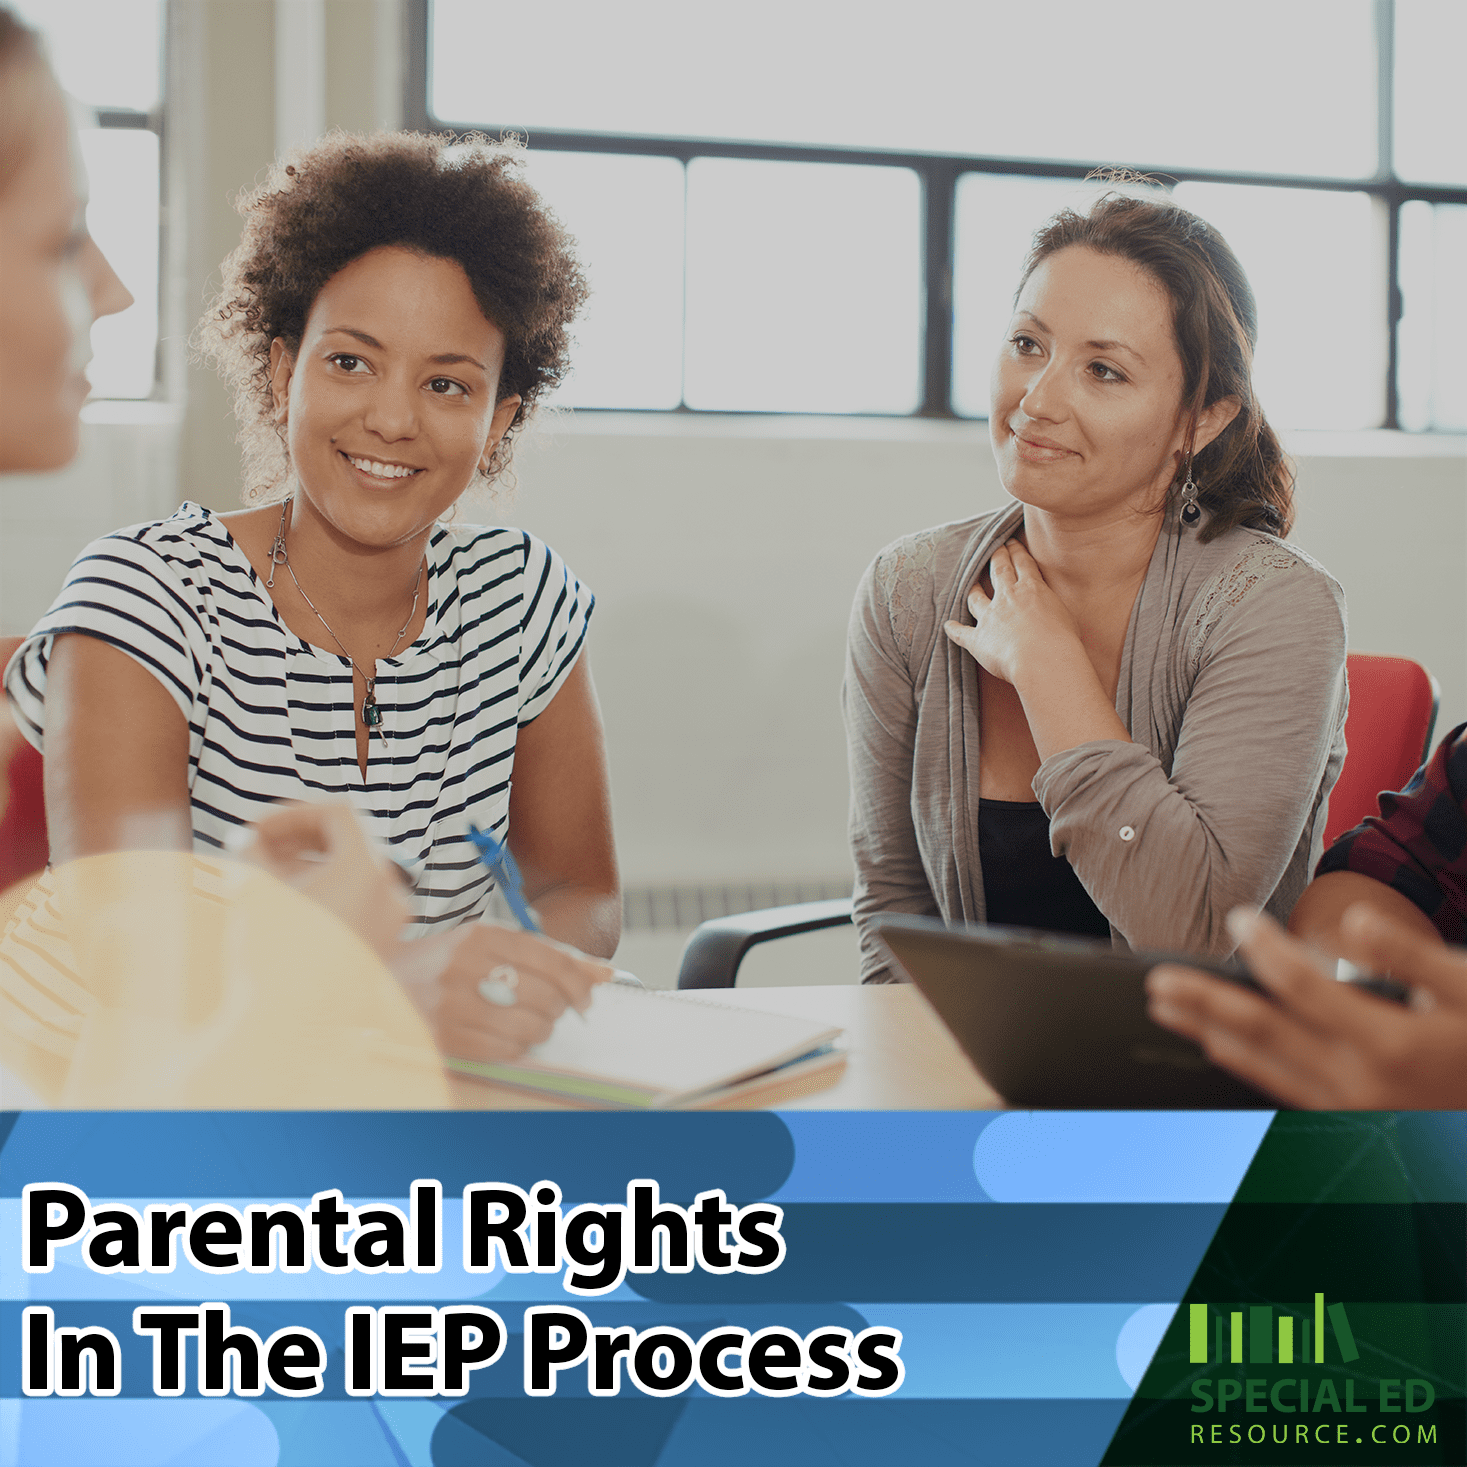 Parents at an IEP meeting which is one of their rights in the IEP process.